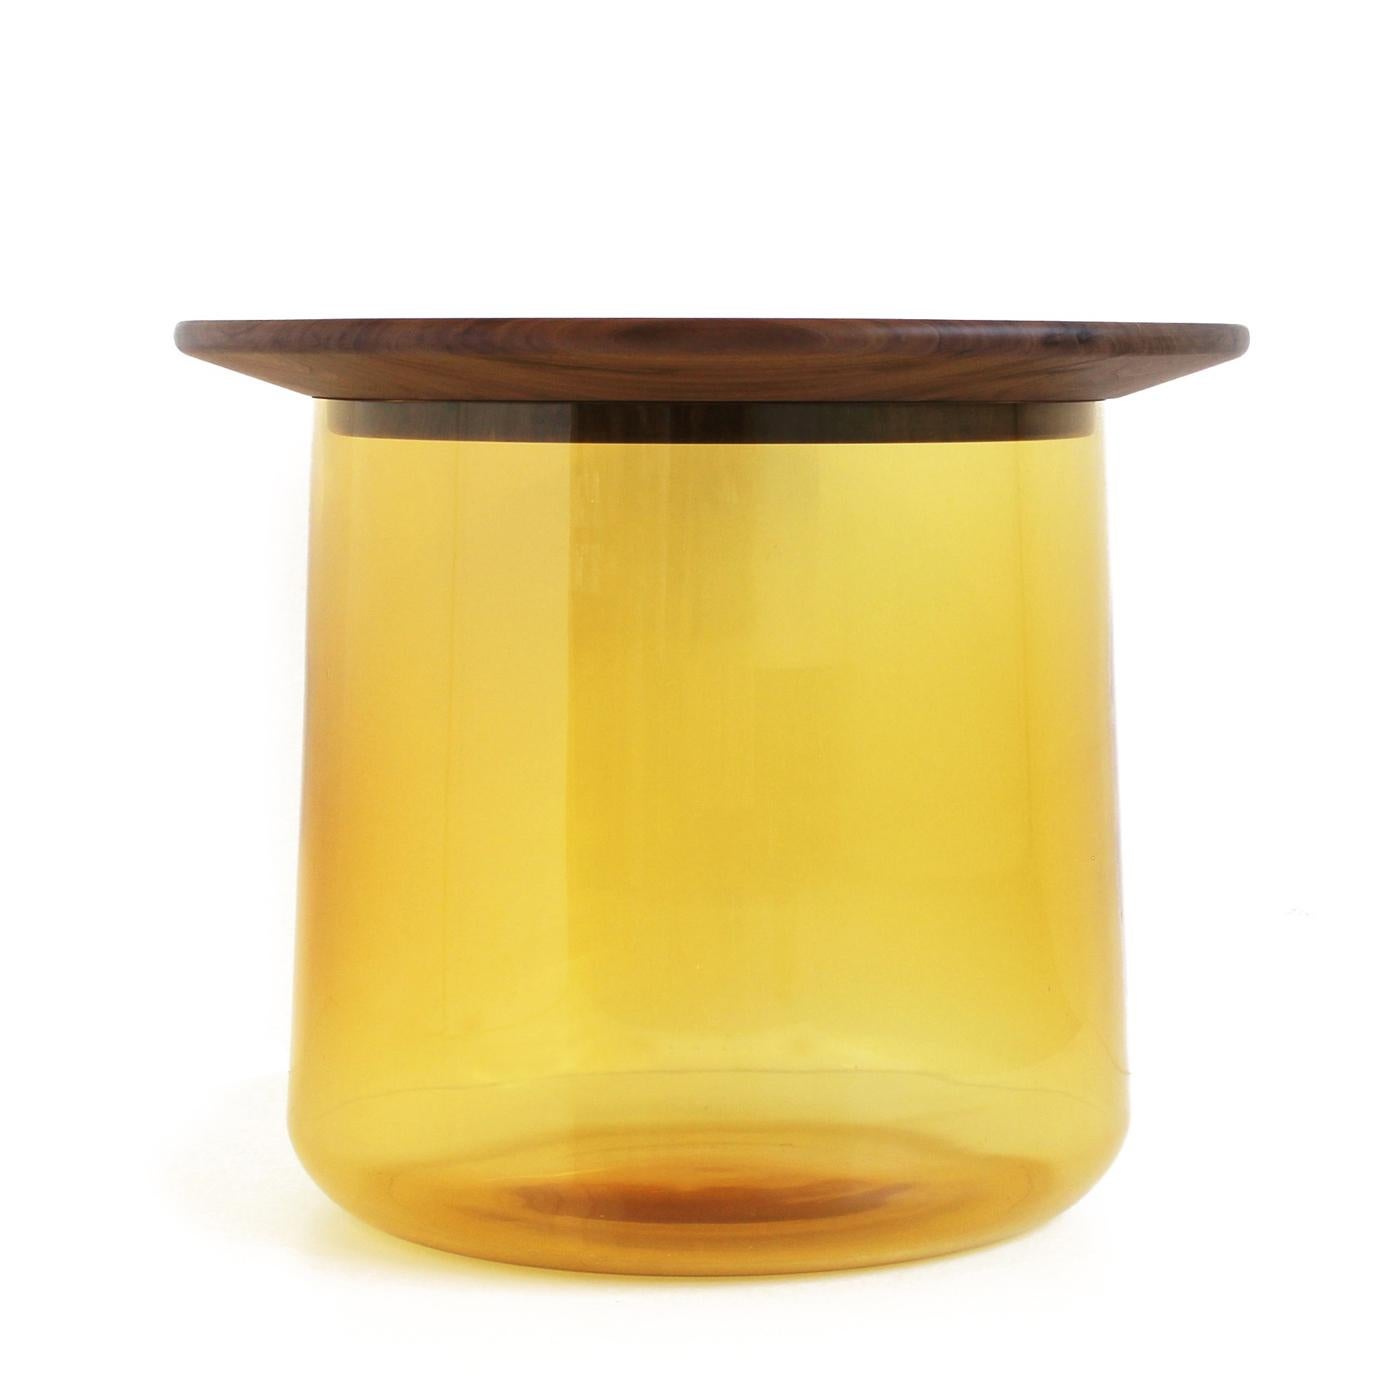 This striking side table is comprised of a large bottom vase in colored glass (that can function as container or storage space), and a top in solid 